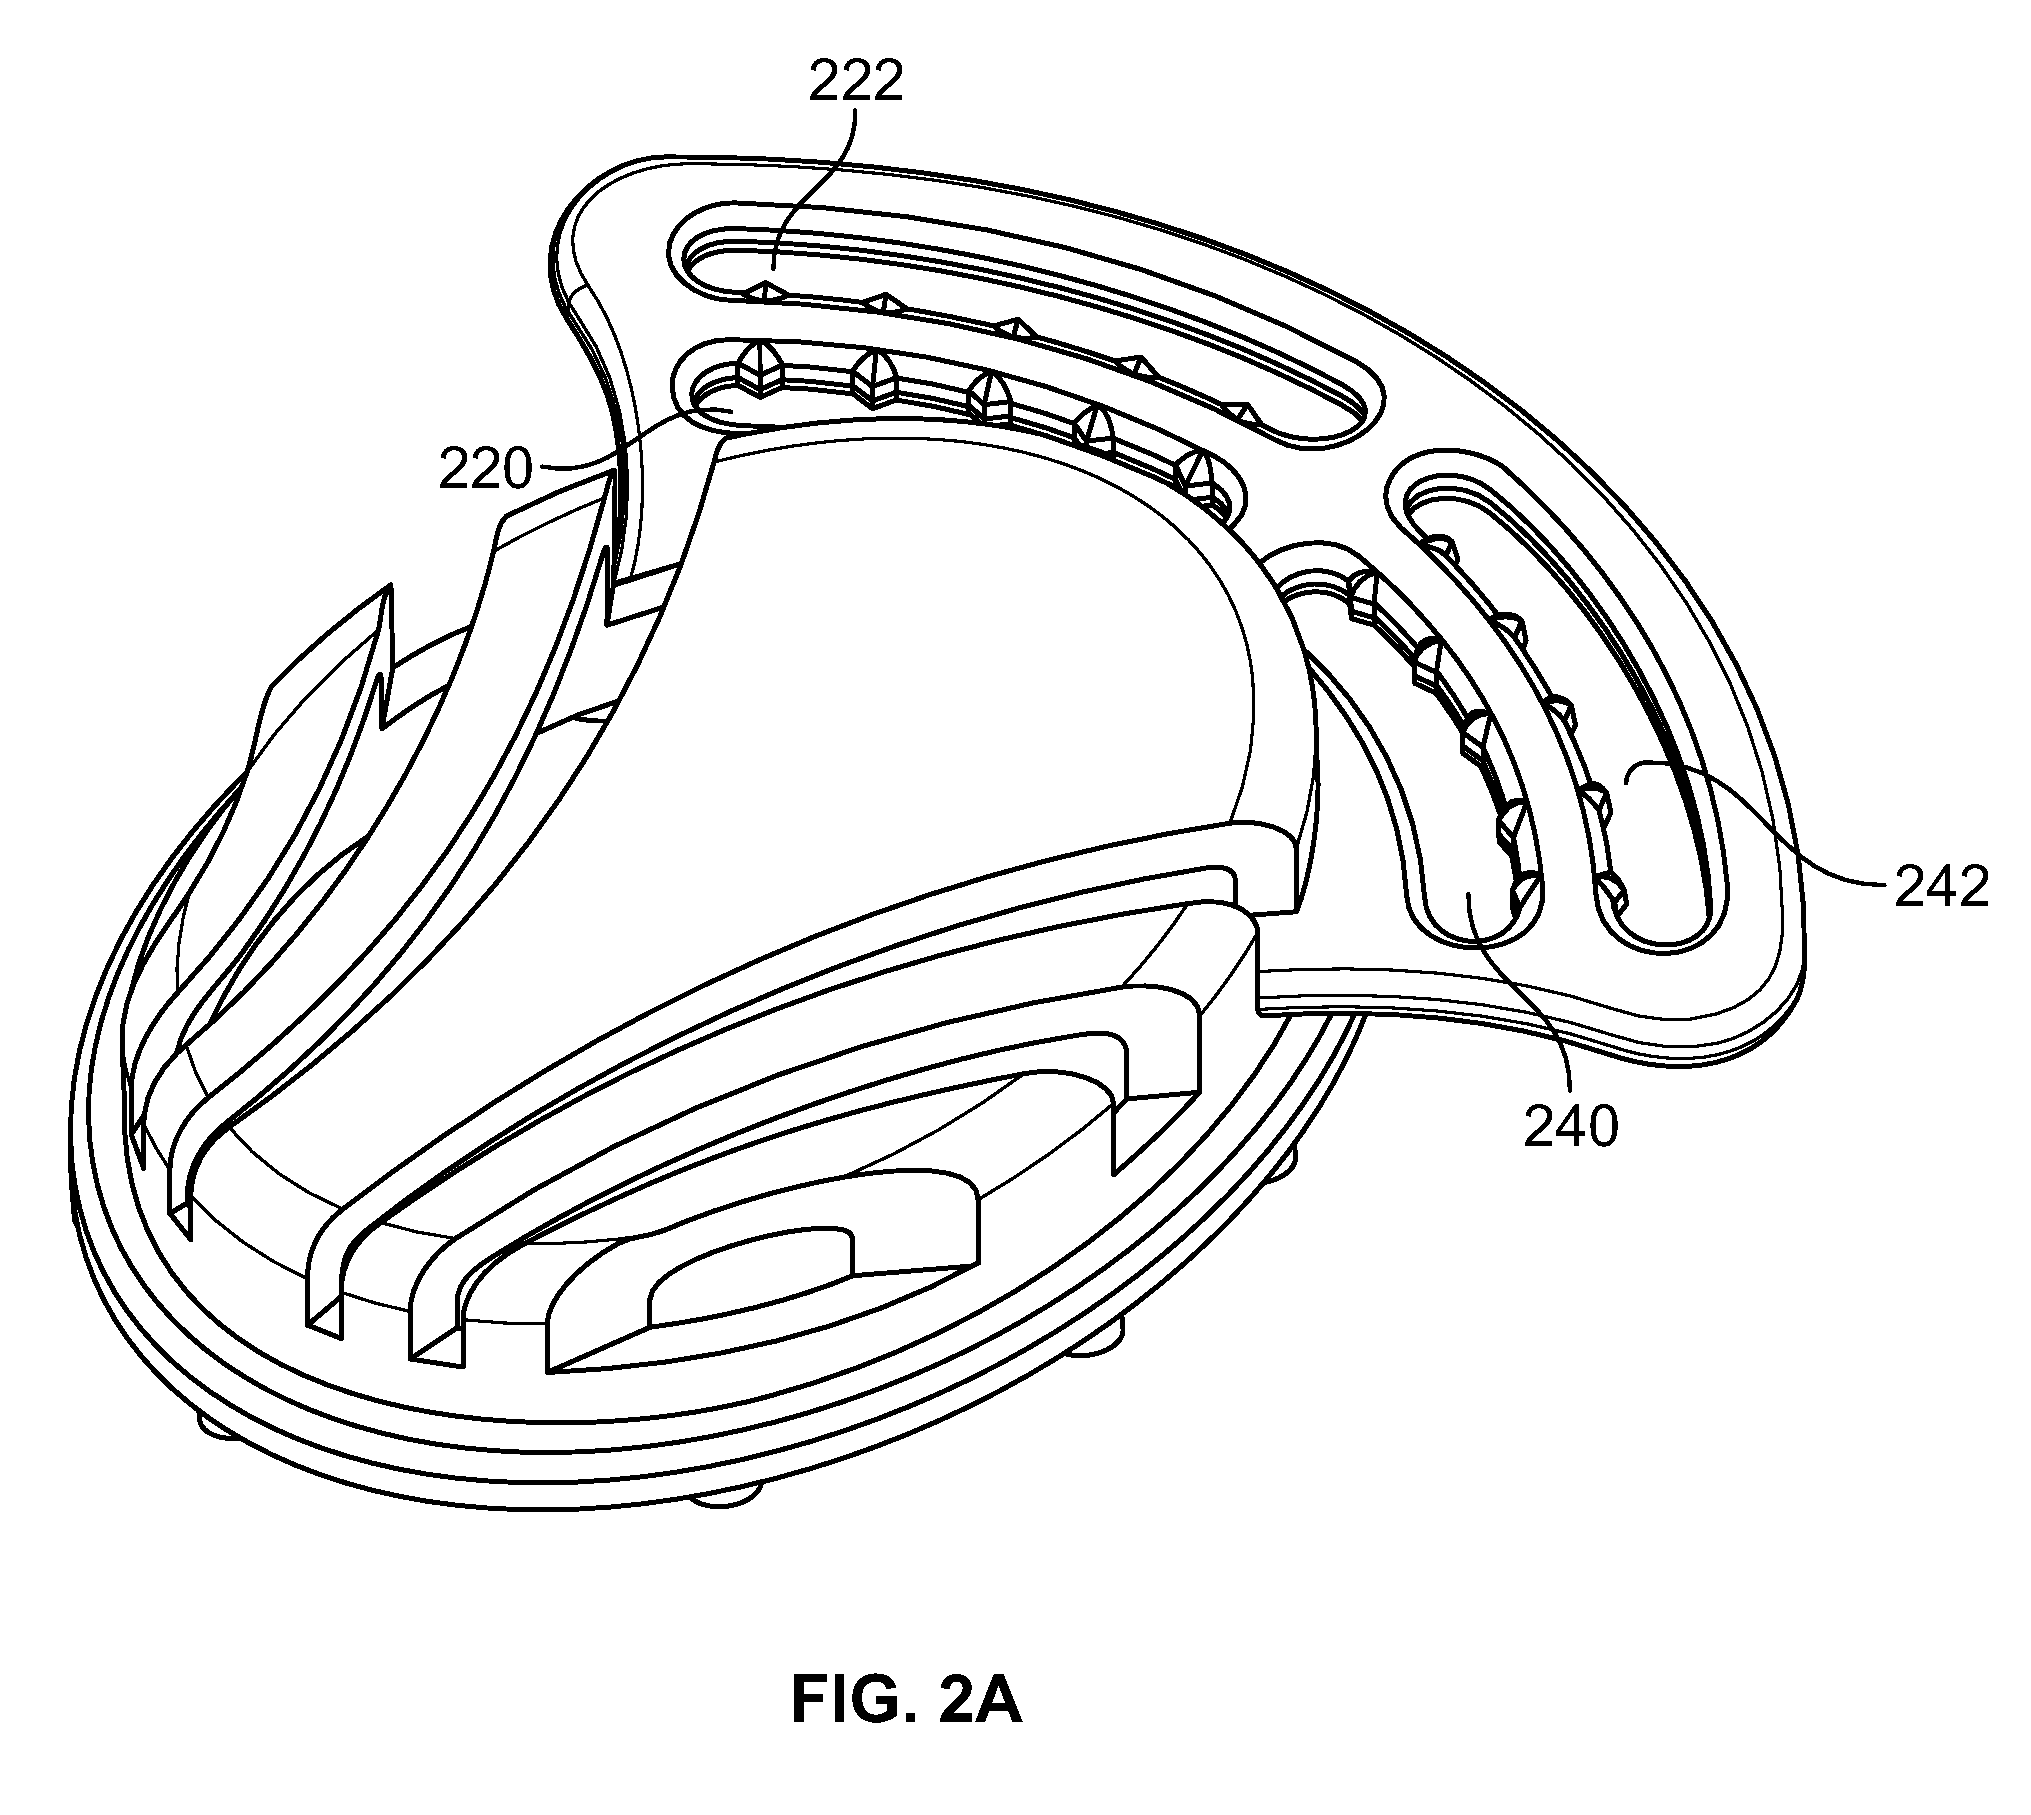 Vent and strap fastening system for a disposable respirator providing improved donning